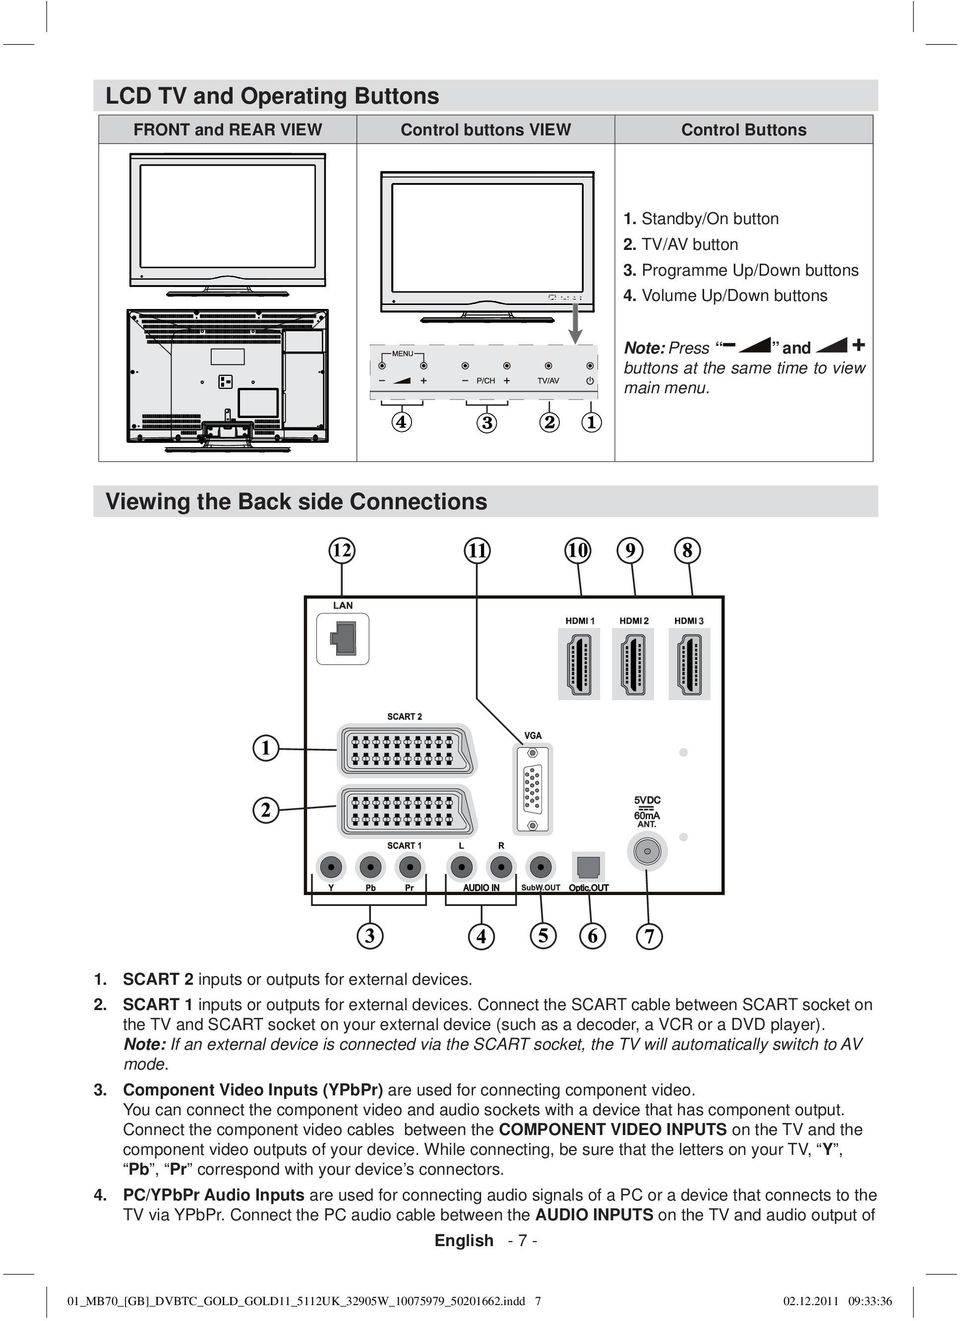 Connect the SCART cable between SCART socket on the TV and SCART socket on your external device (such as a decoder, a VCR or a DVD player).